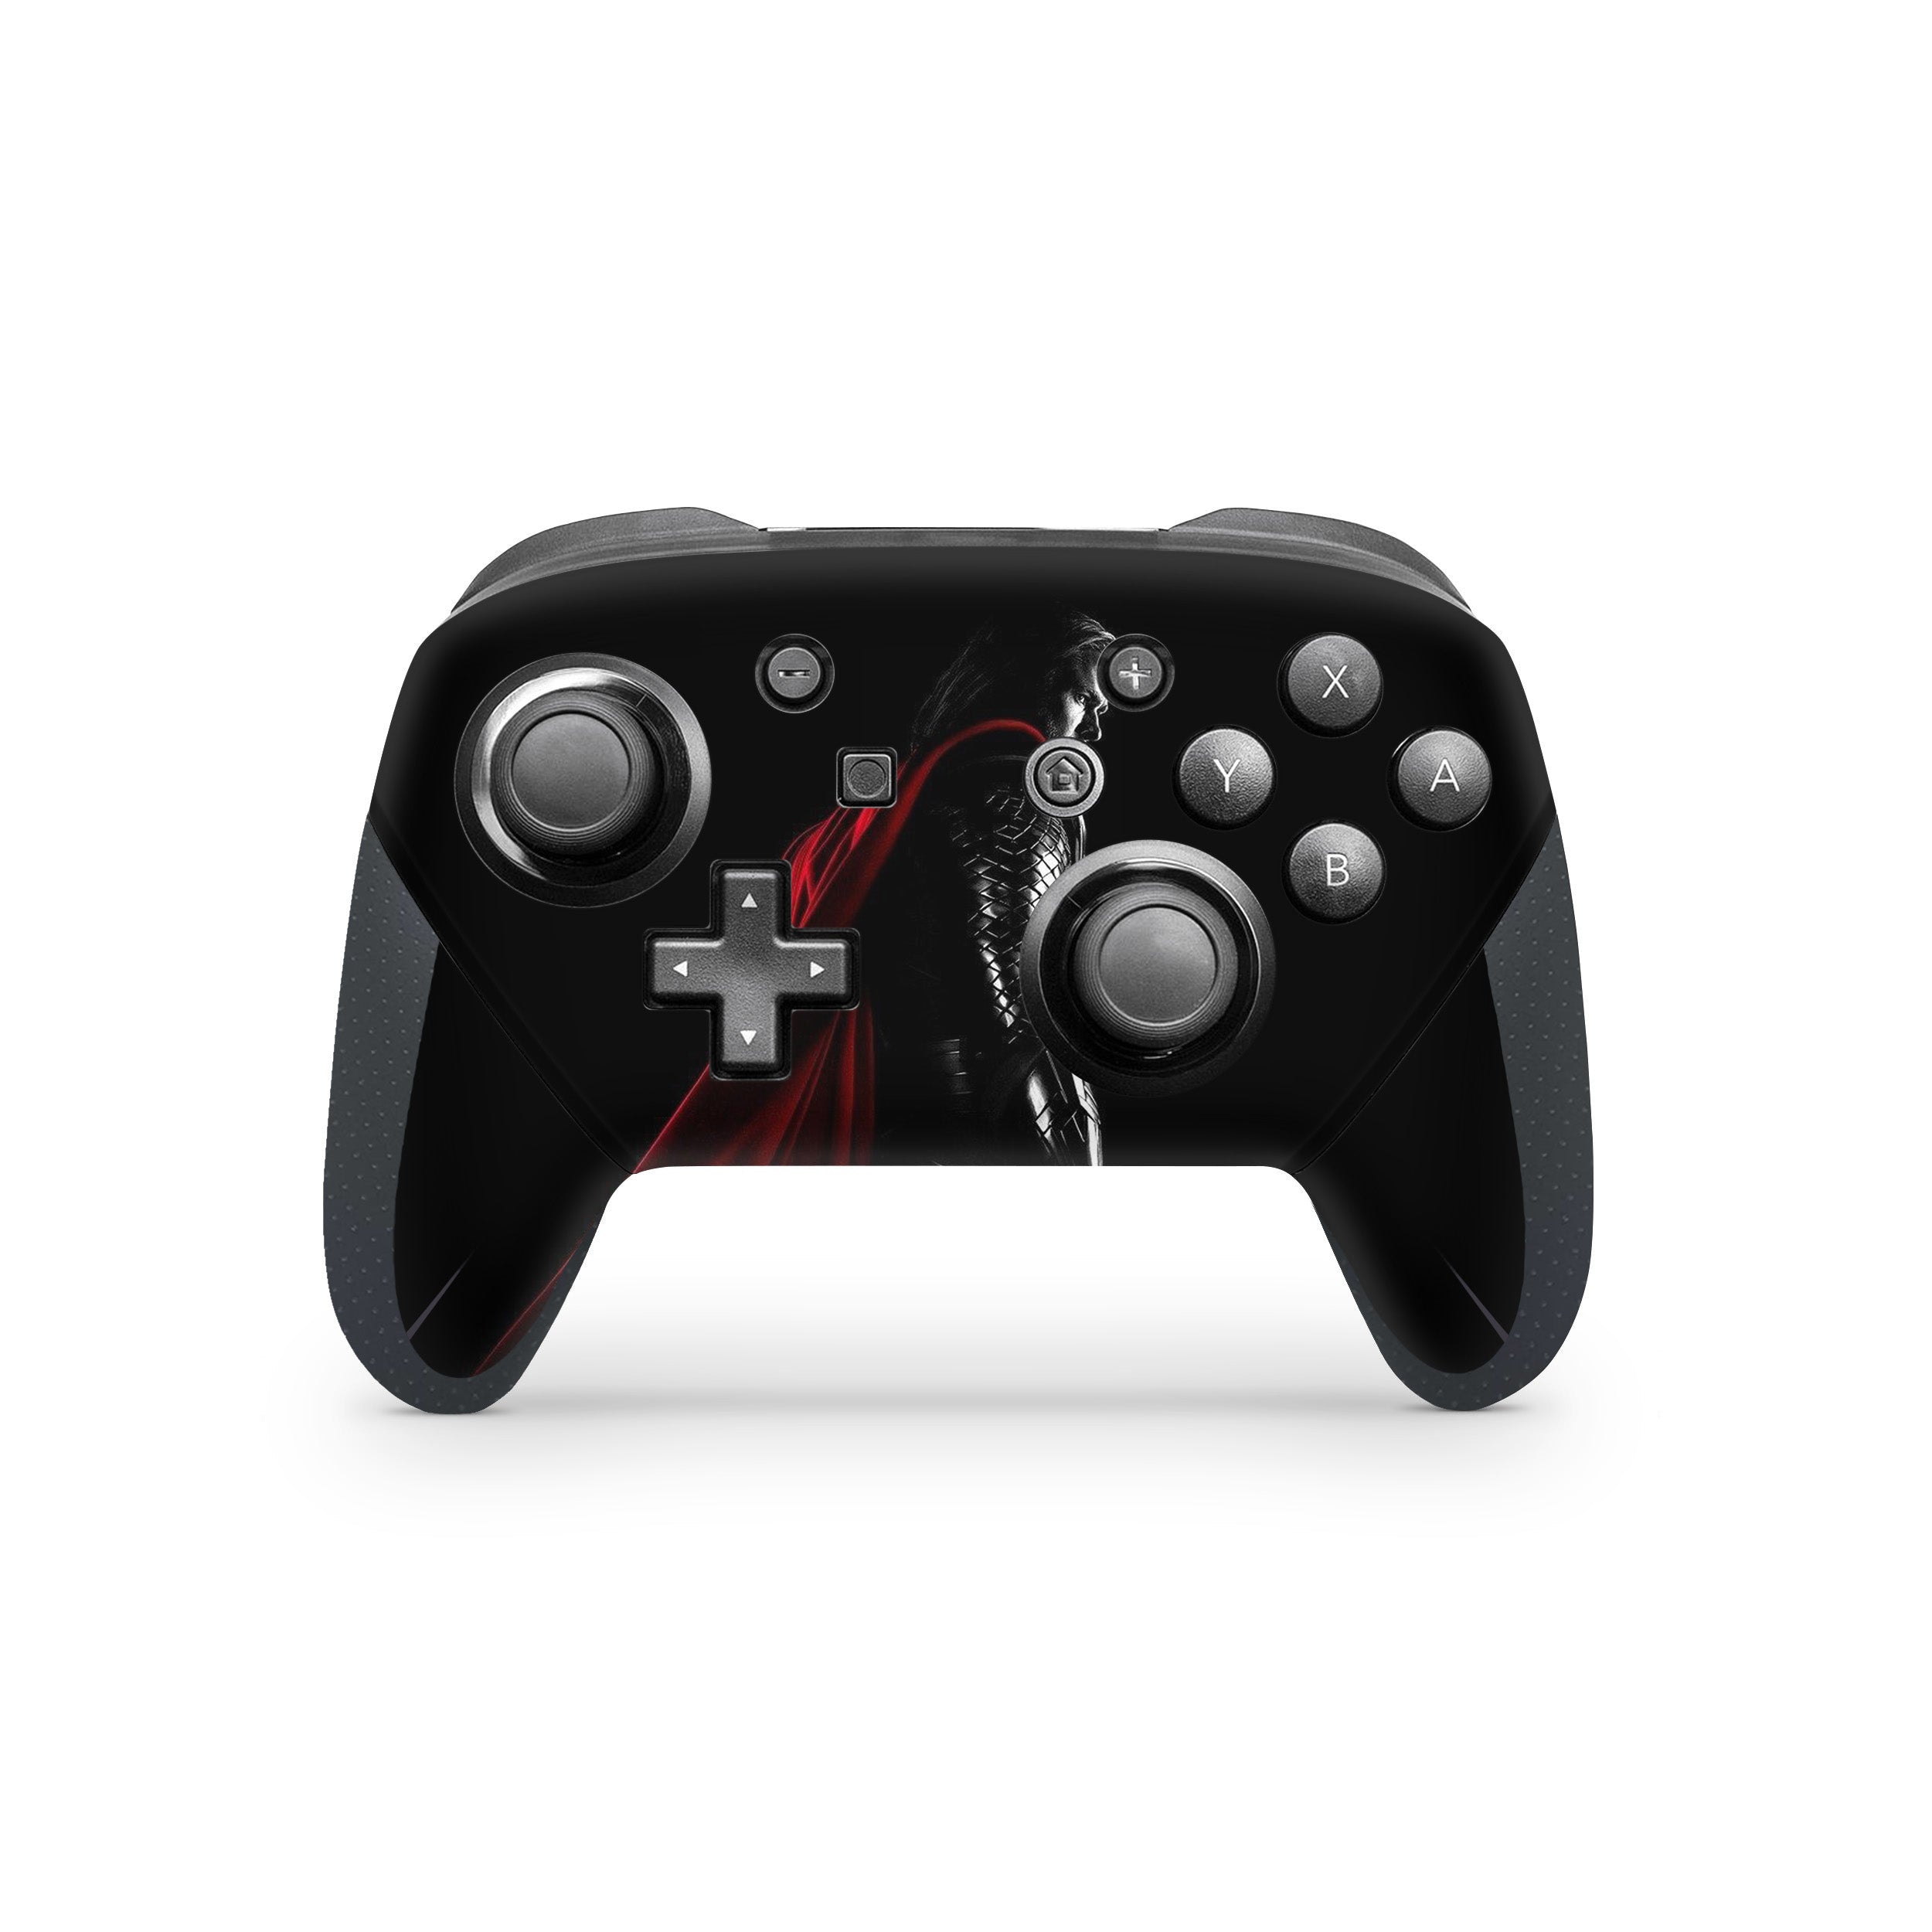 A video game skin featuring a Marvel Thor design for the Switch Pro Controller.